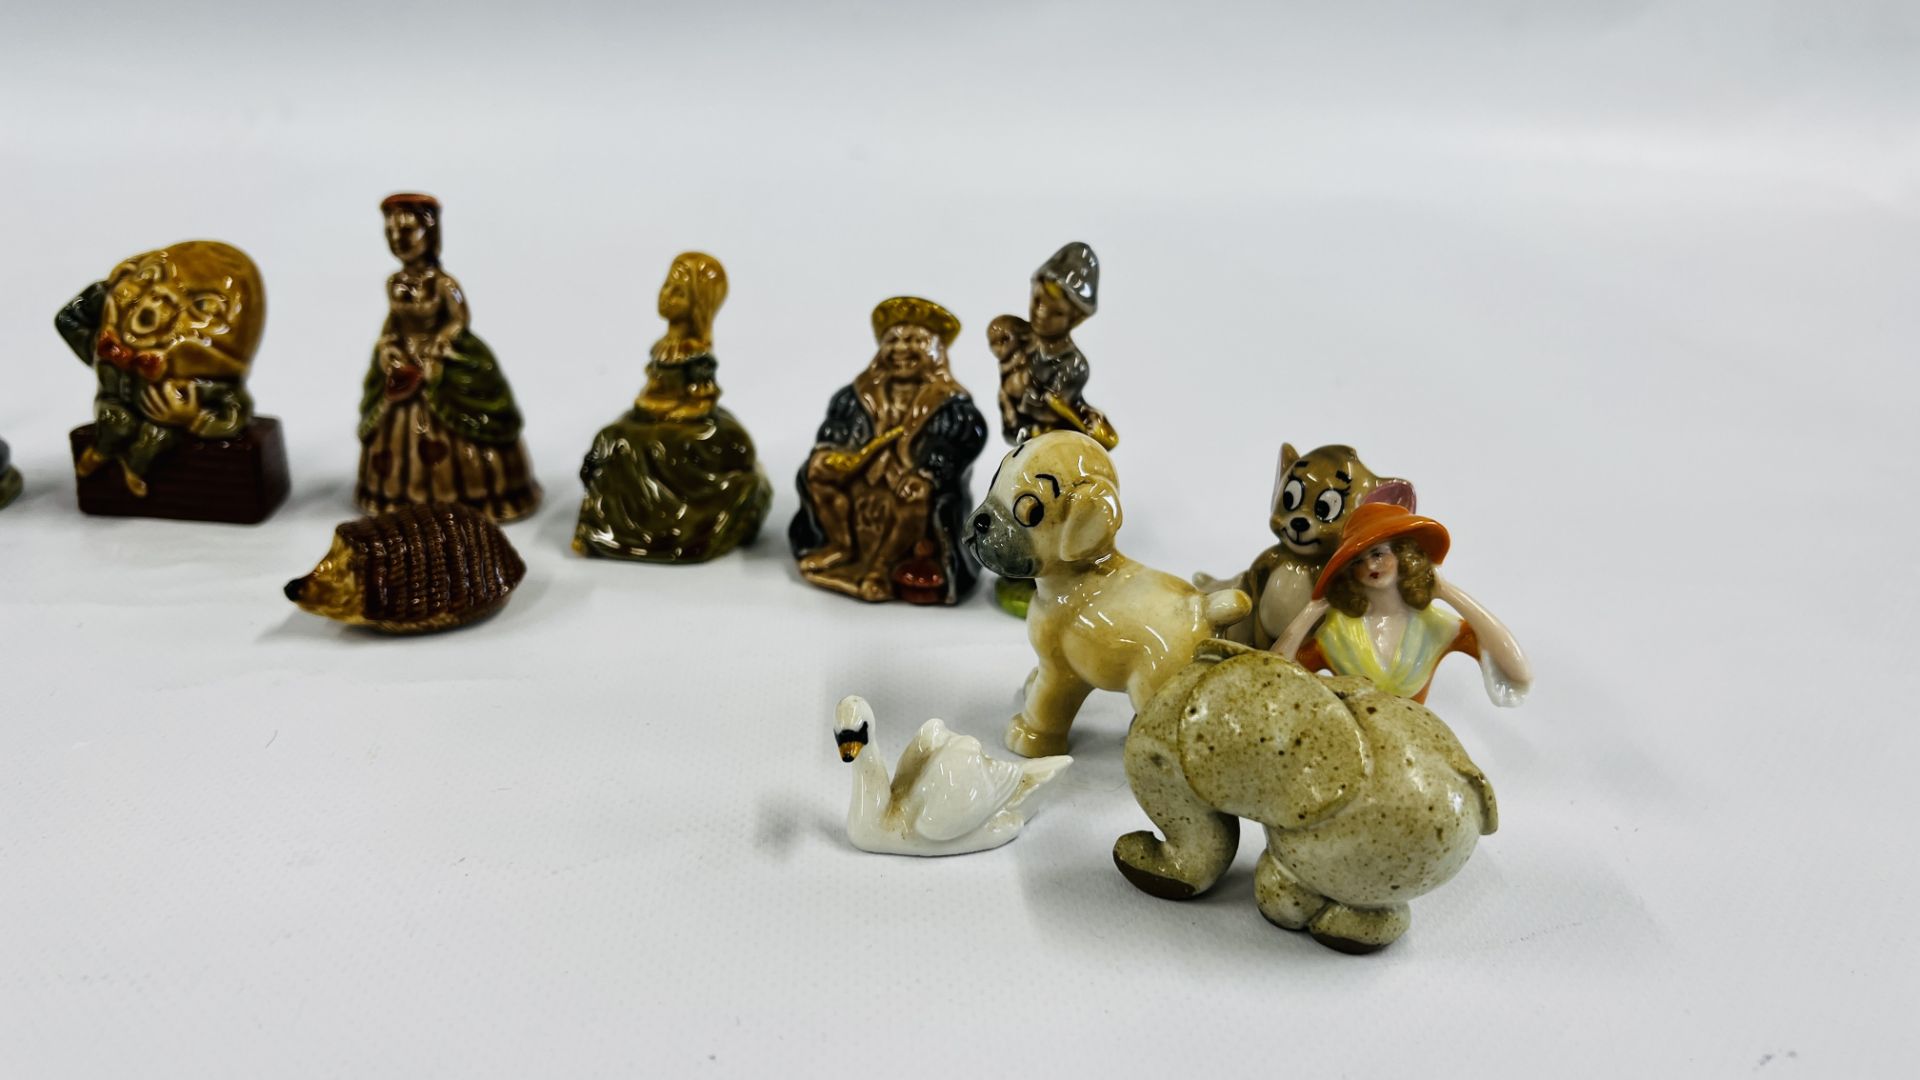 A GROUP OF WADE WHIMSIES TO INCLUDE NURSERY RHYME EXAMPLES SUCH AS HUMPTY DUMPTY, ETC. - Image 6 of 6